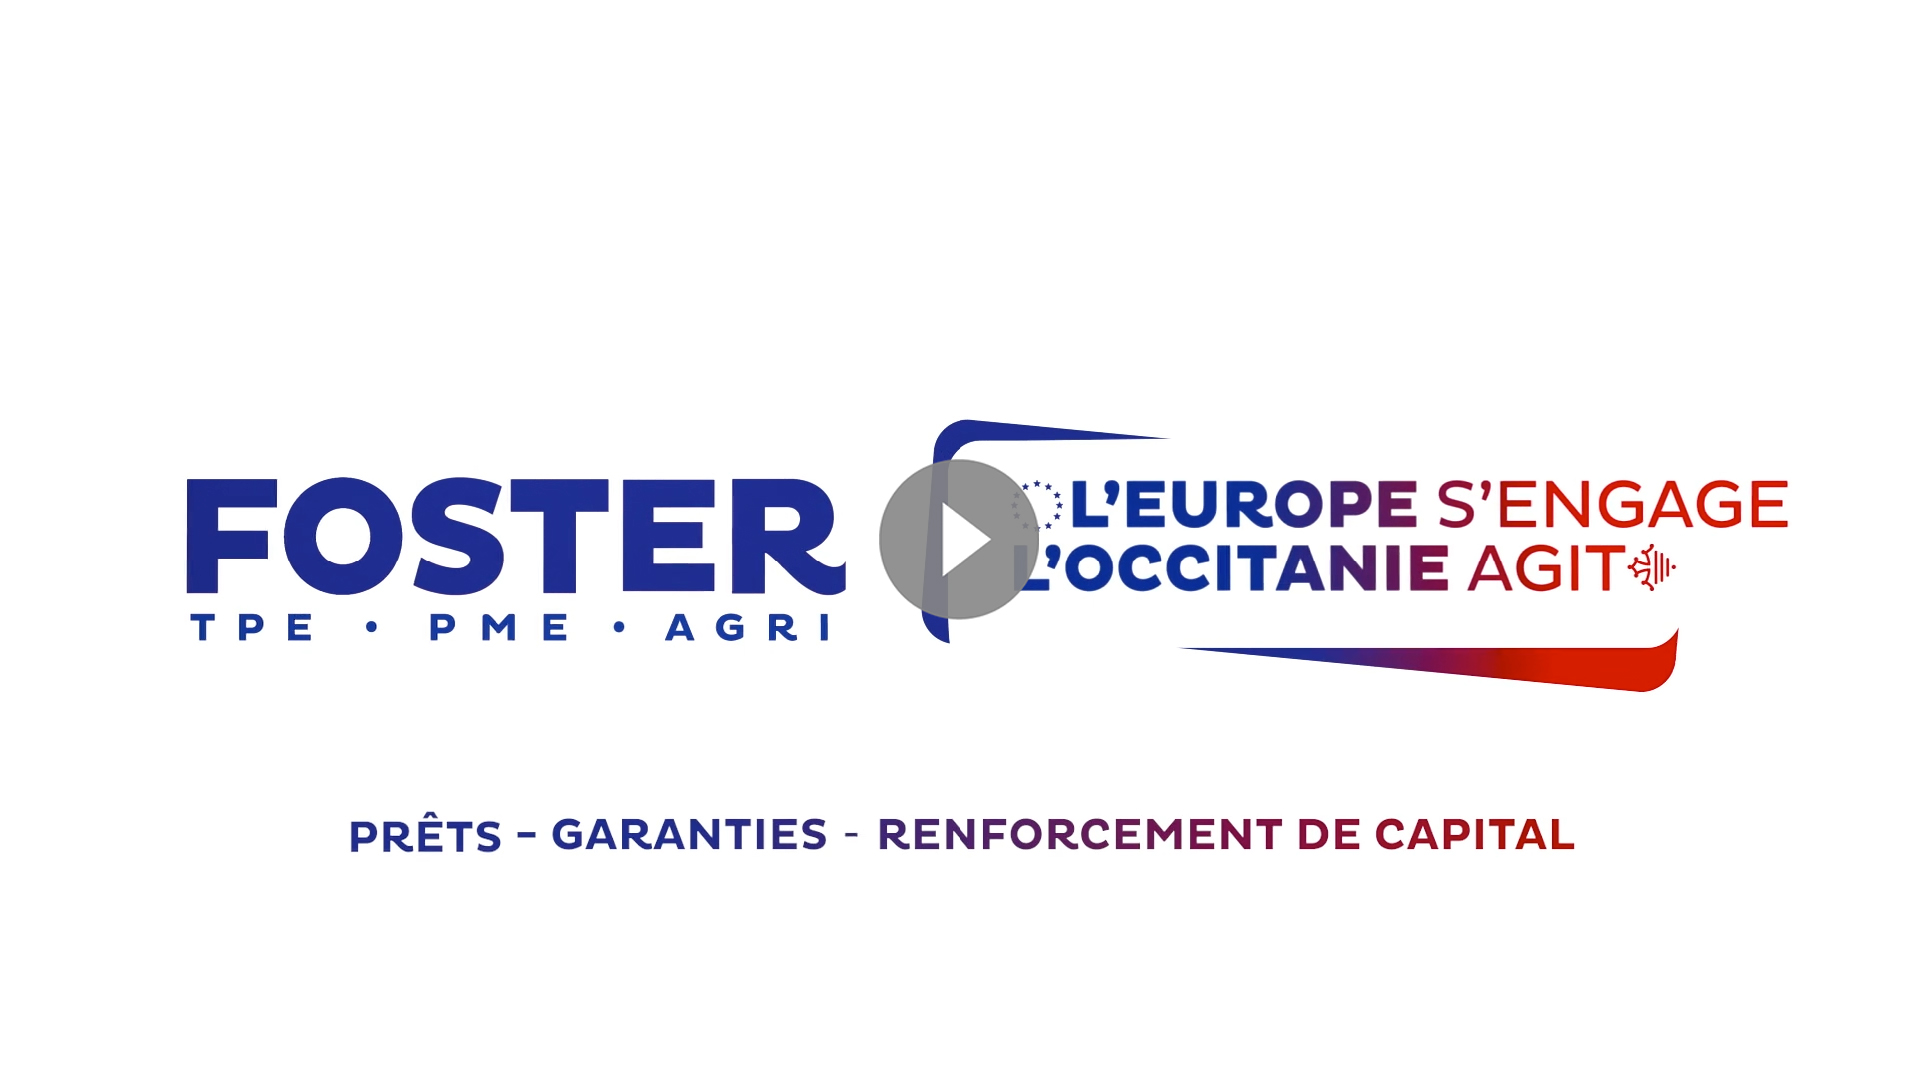 Video stories from France: FOSTER TPE-PME